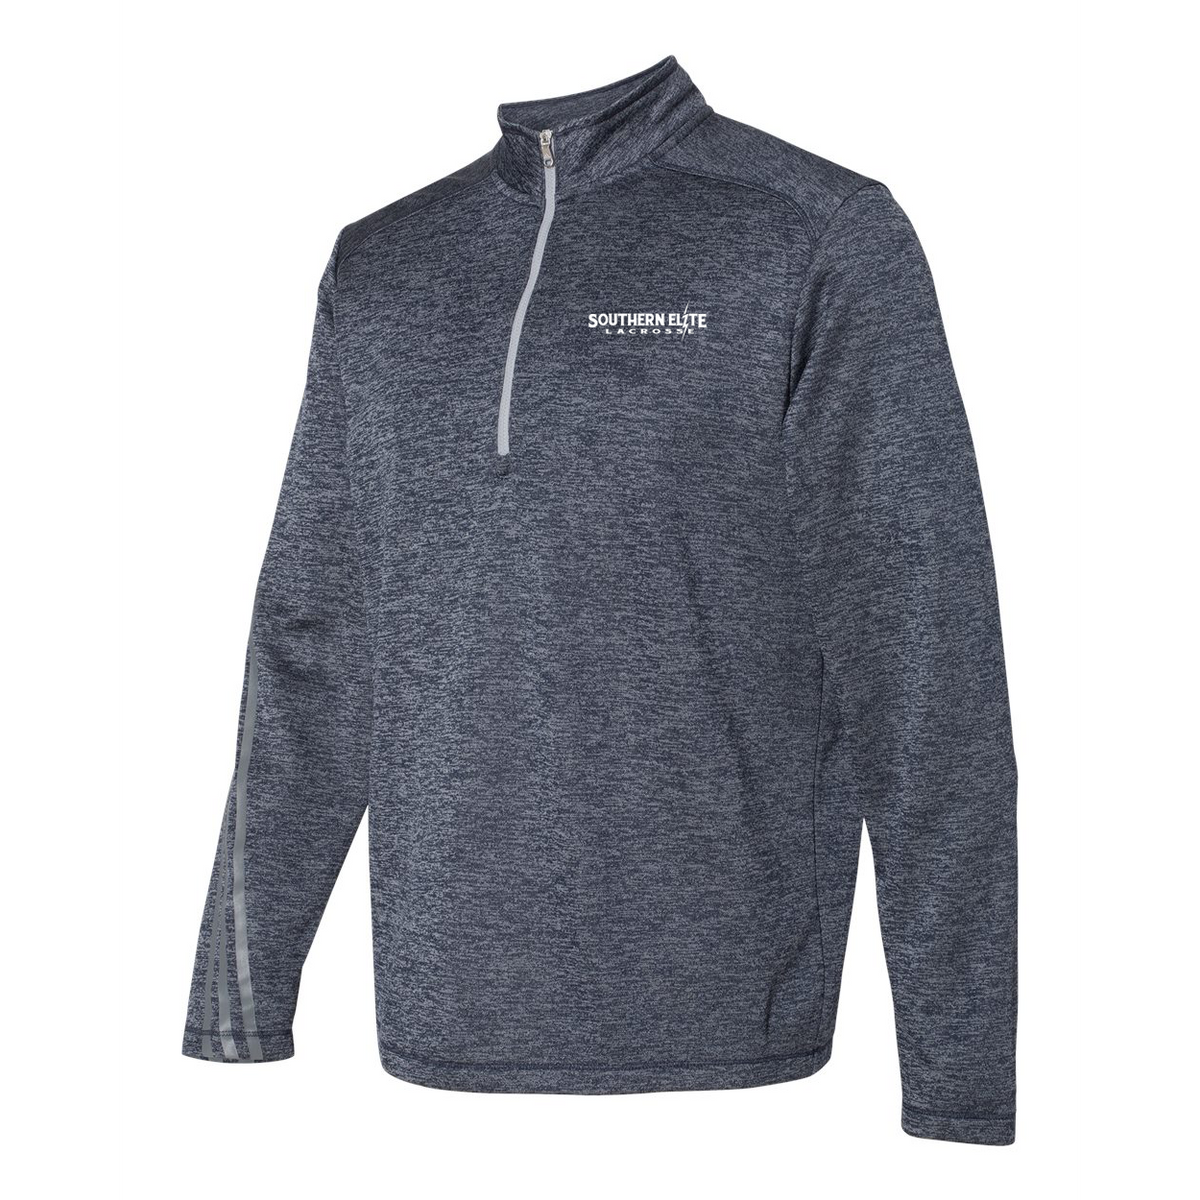 Southern Elite Lacrosse Adidas Terry Heathered Quarter-Zip Pullover